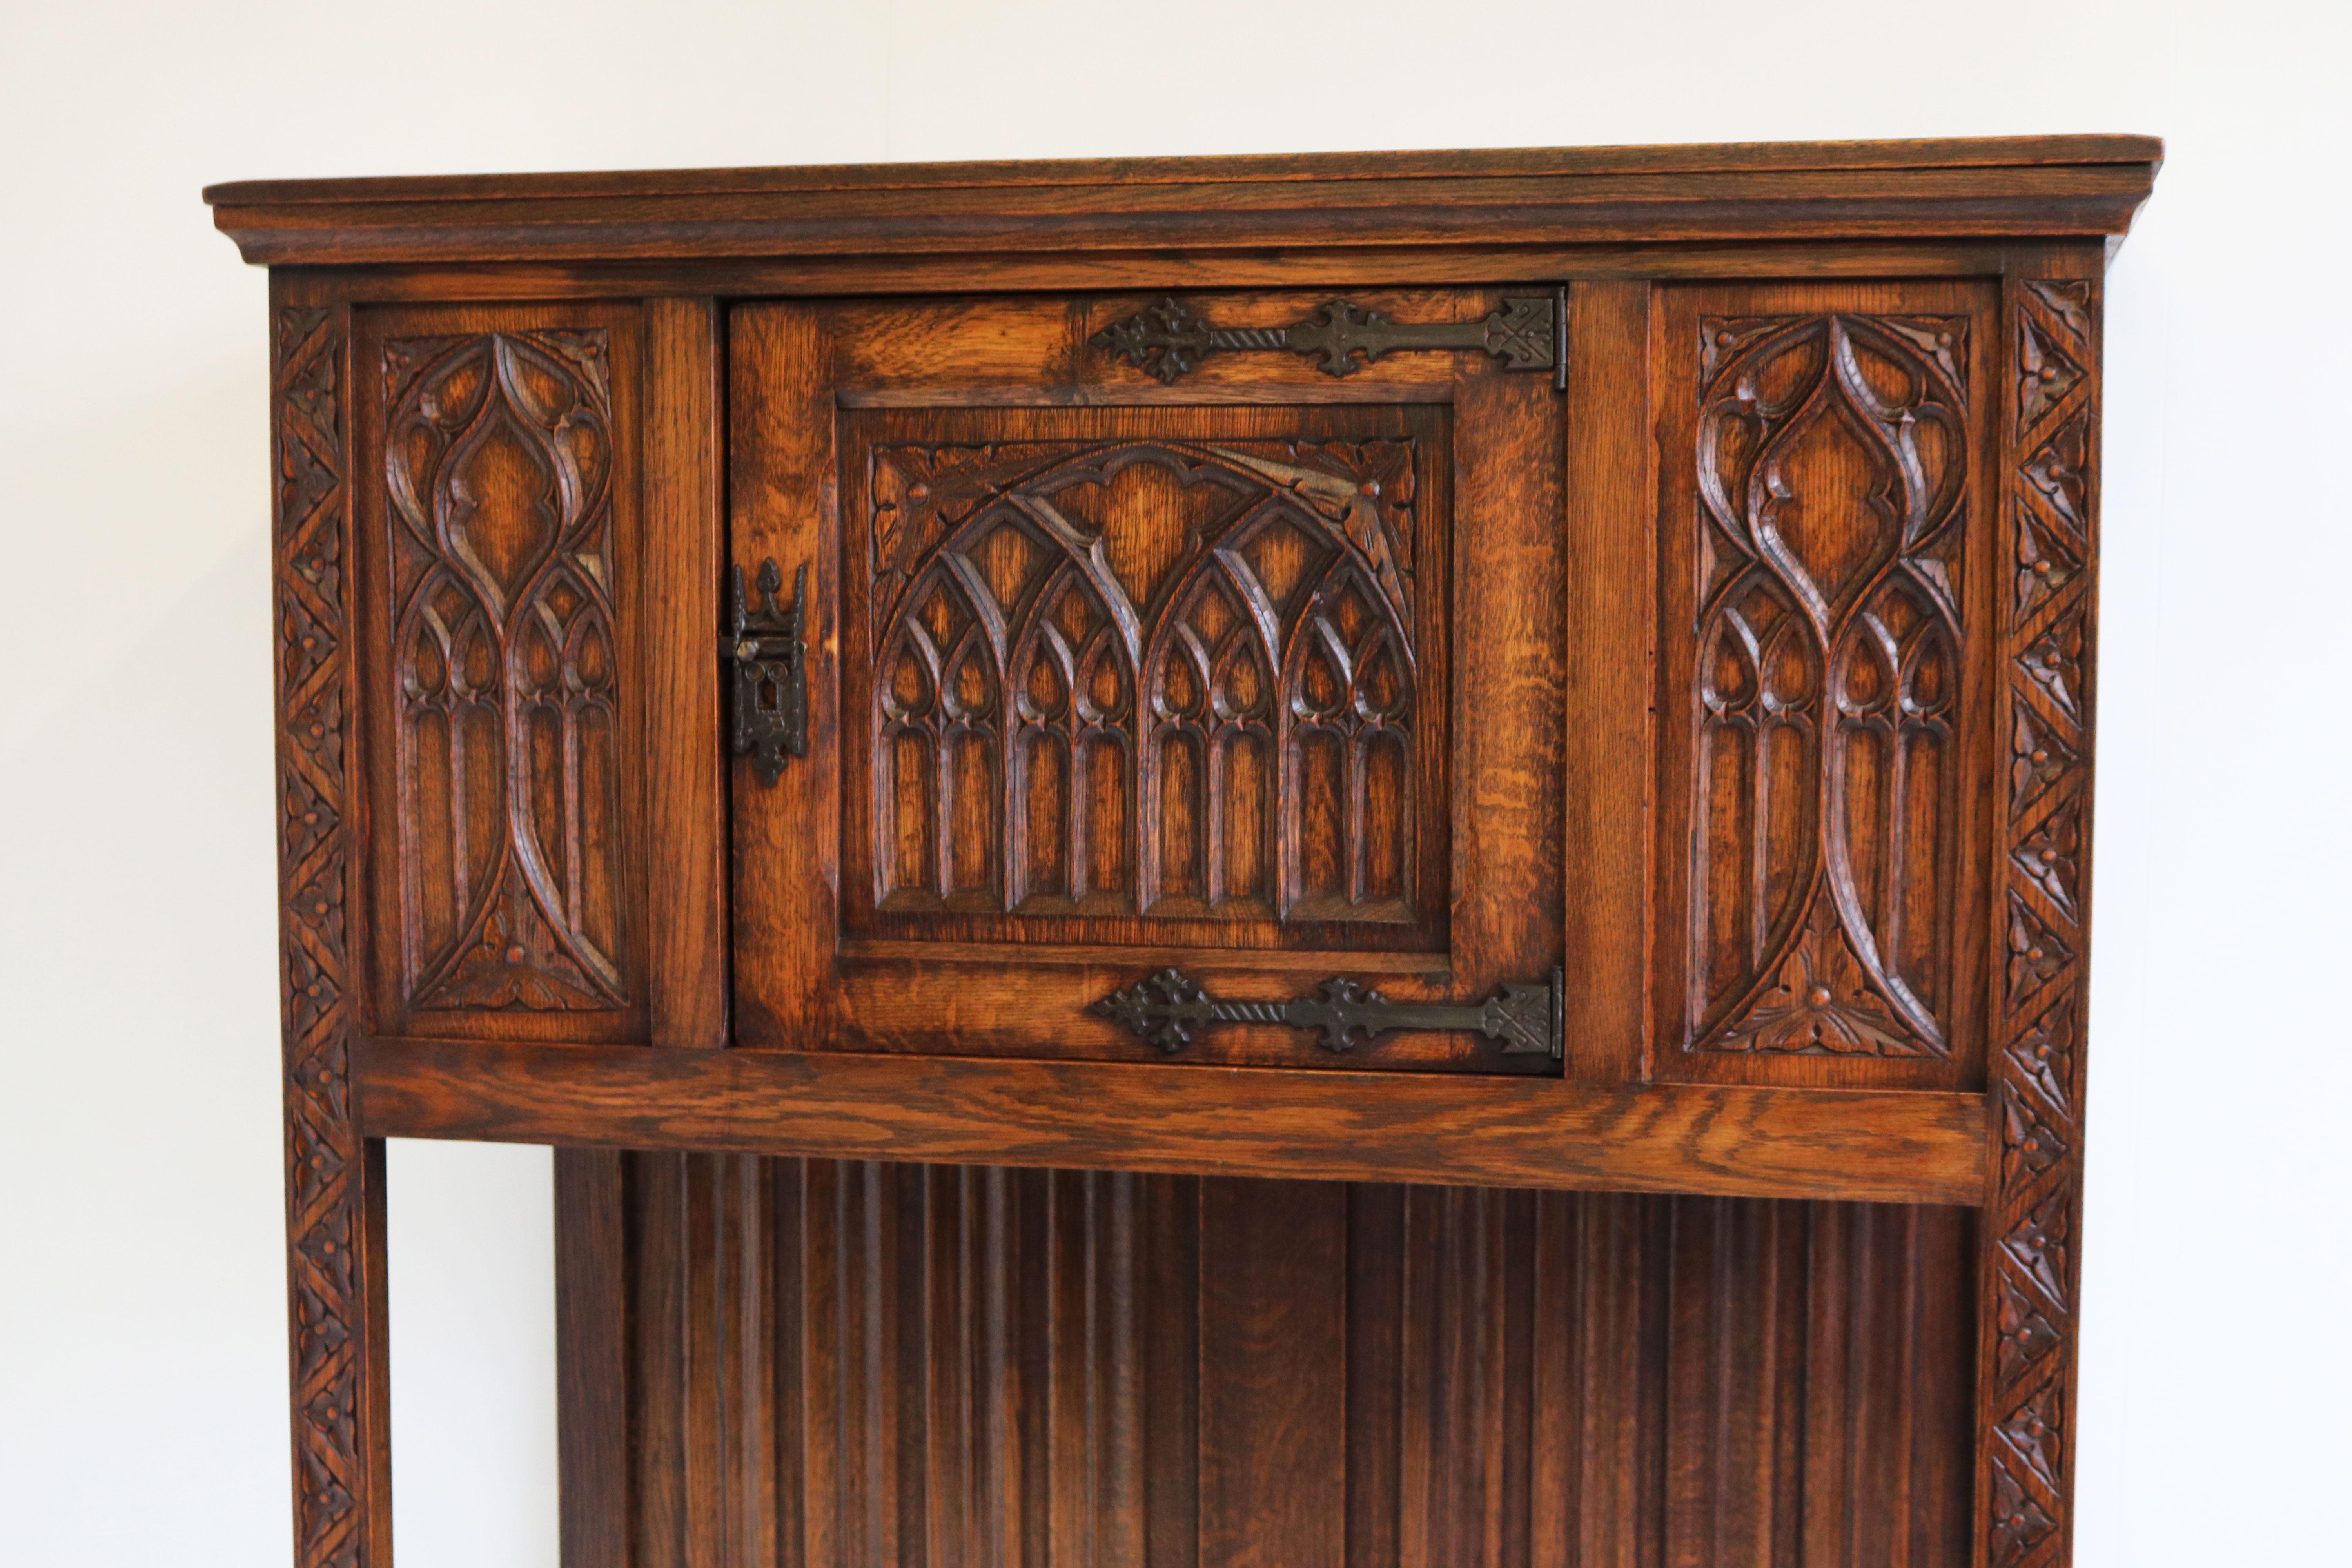 Marvelous & rare ! This Gothic Revival dry bar / drinks cabinet in European oak. 
Gorgeous carved details like church windows, booked panels & Gothic style decorations. 
The door can be used to store your glasses & drinks inside with additional